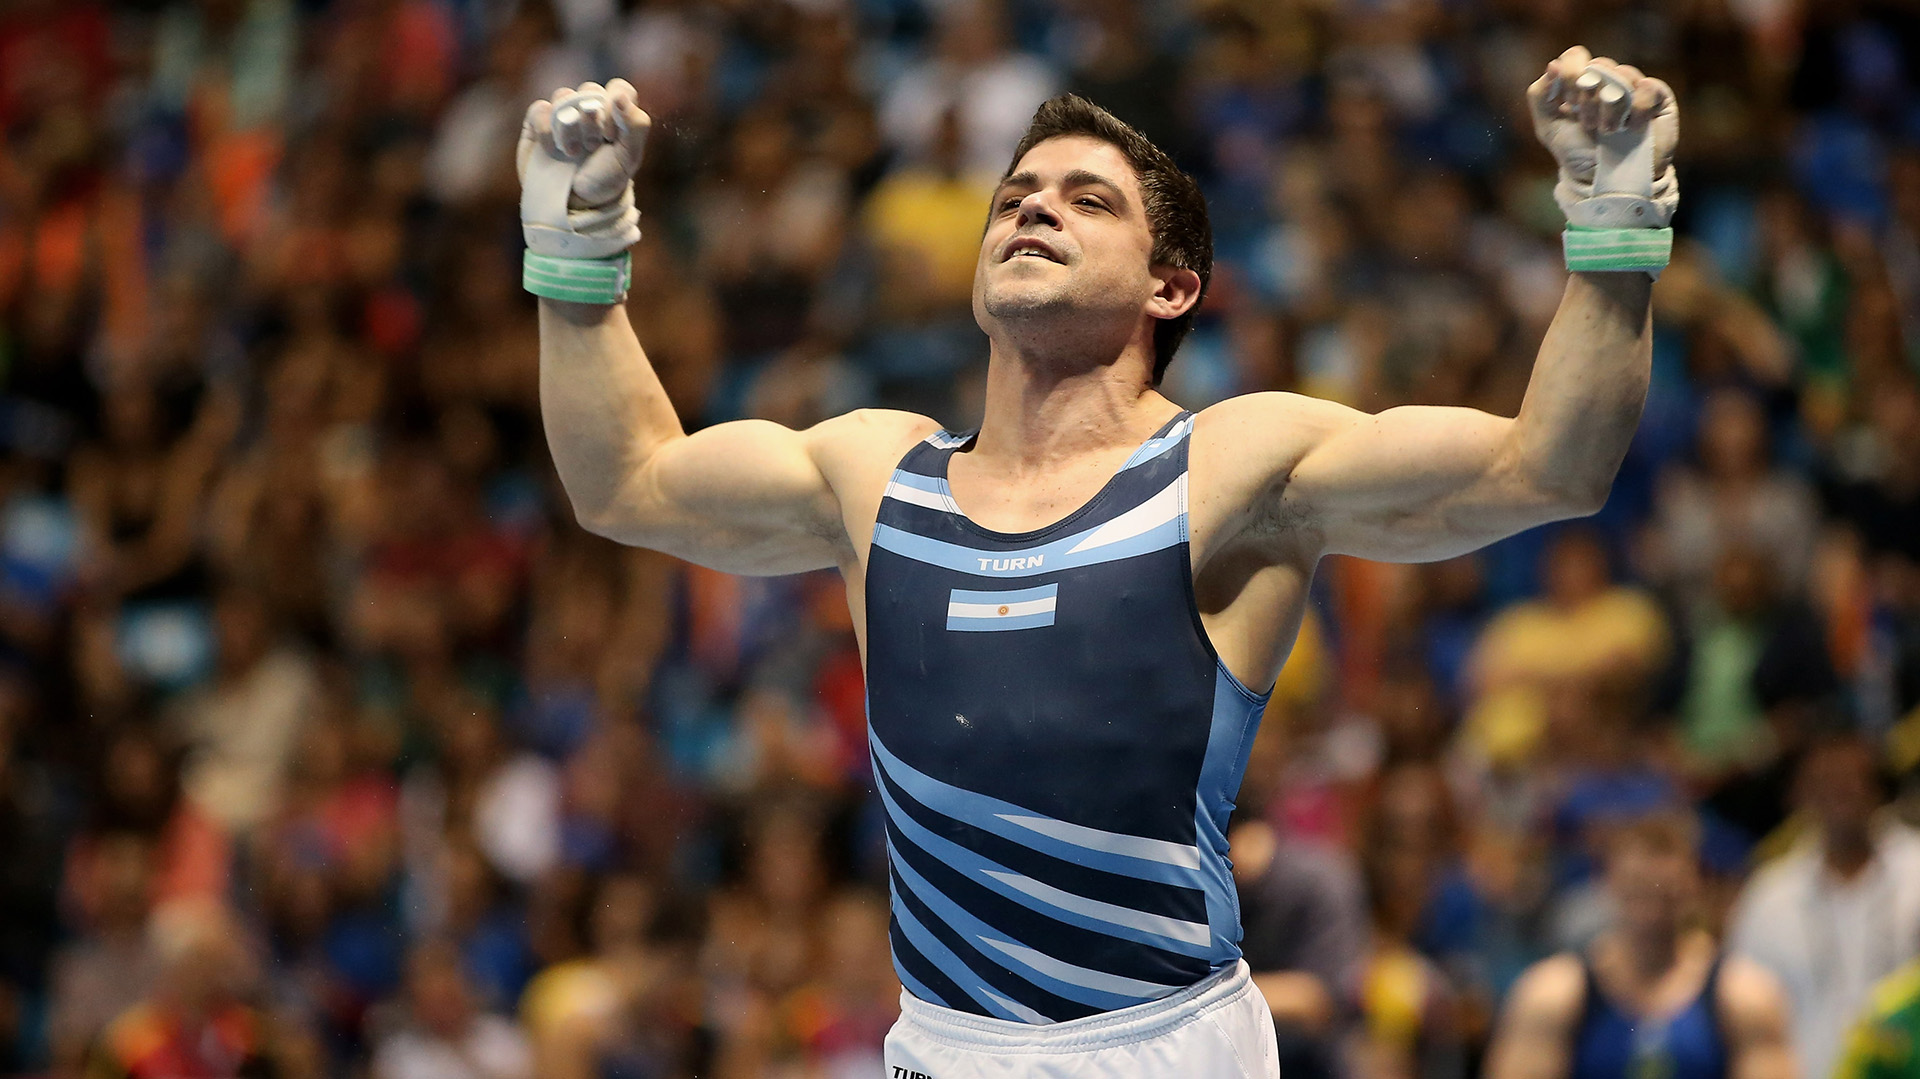 SAO PAULO, BRAZIL - MAY 03:  Federico Molinari of Argentina competes on the Rings during day two of the Gymnastics World Challenge Cup Brazil 2015 at Ibirapuera Gymnasium on May 3, 2015 in Sao Paulo, Brazil.  (Photo by Friedemann Vogel/Getty Images)